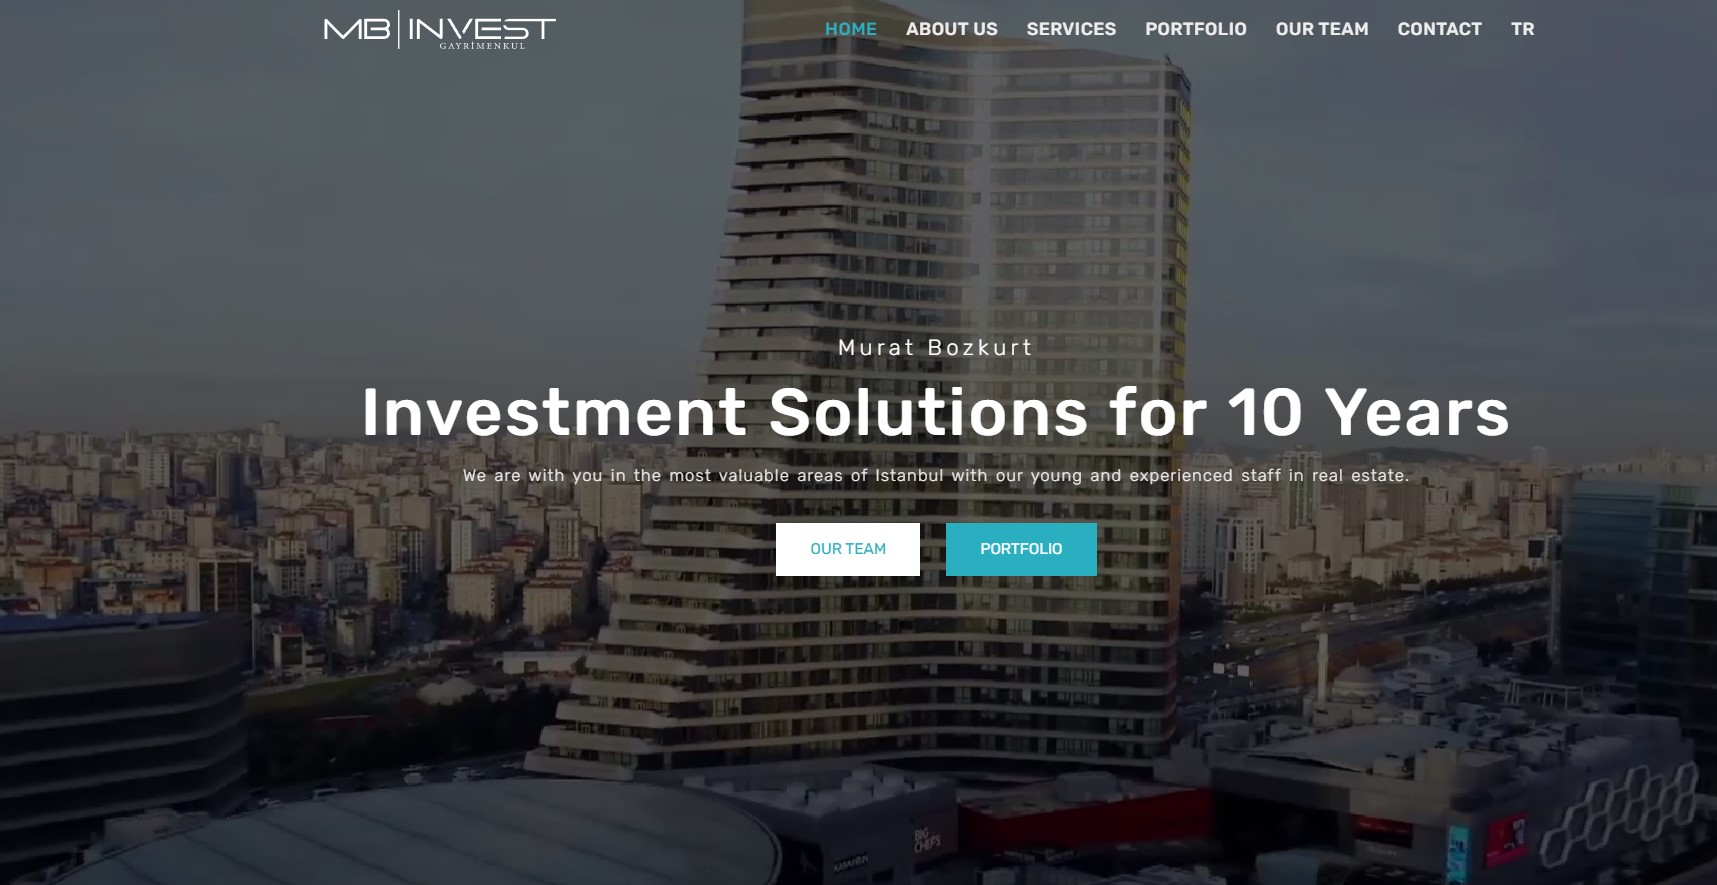 mbinvest review